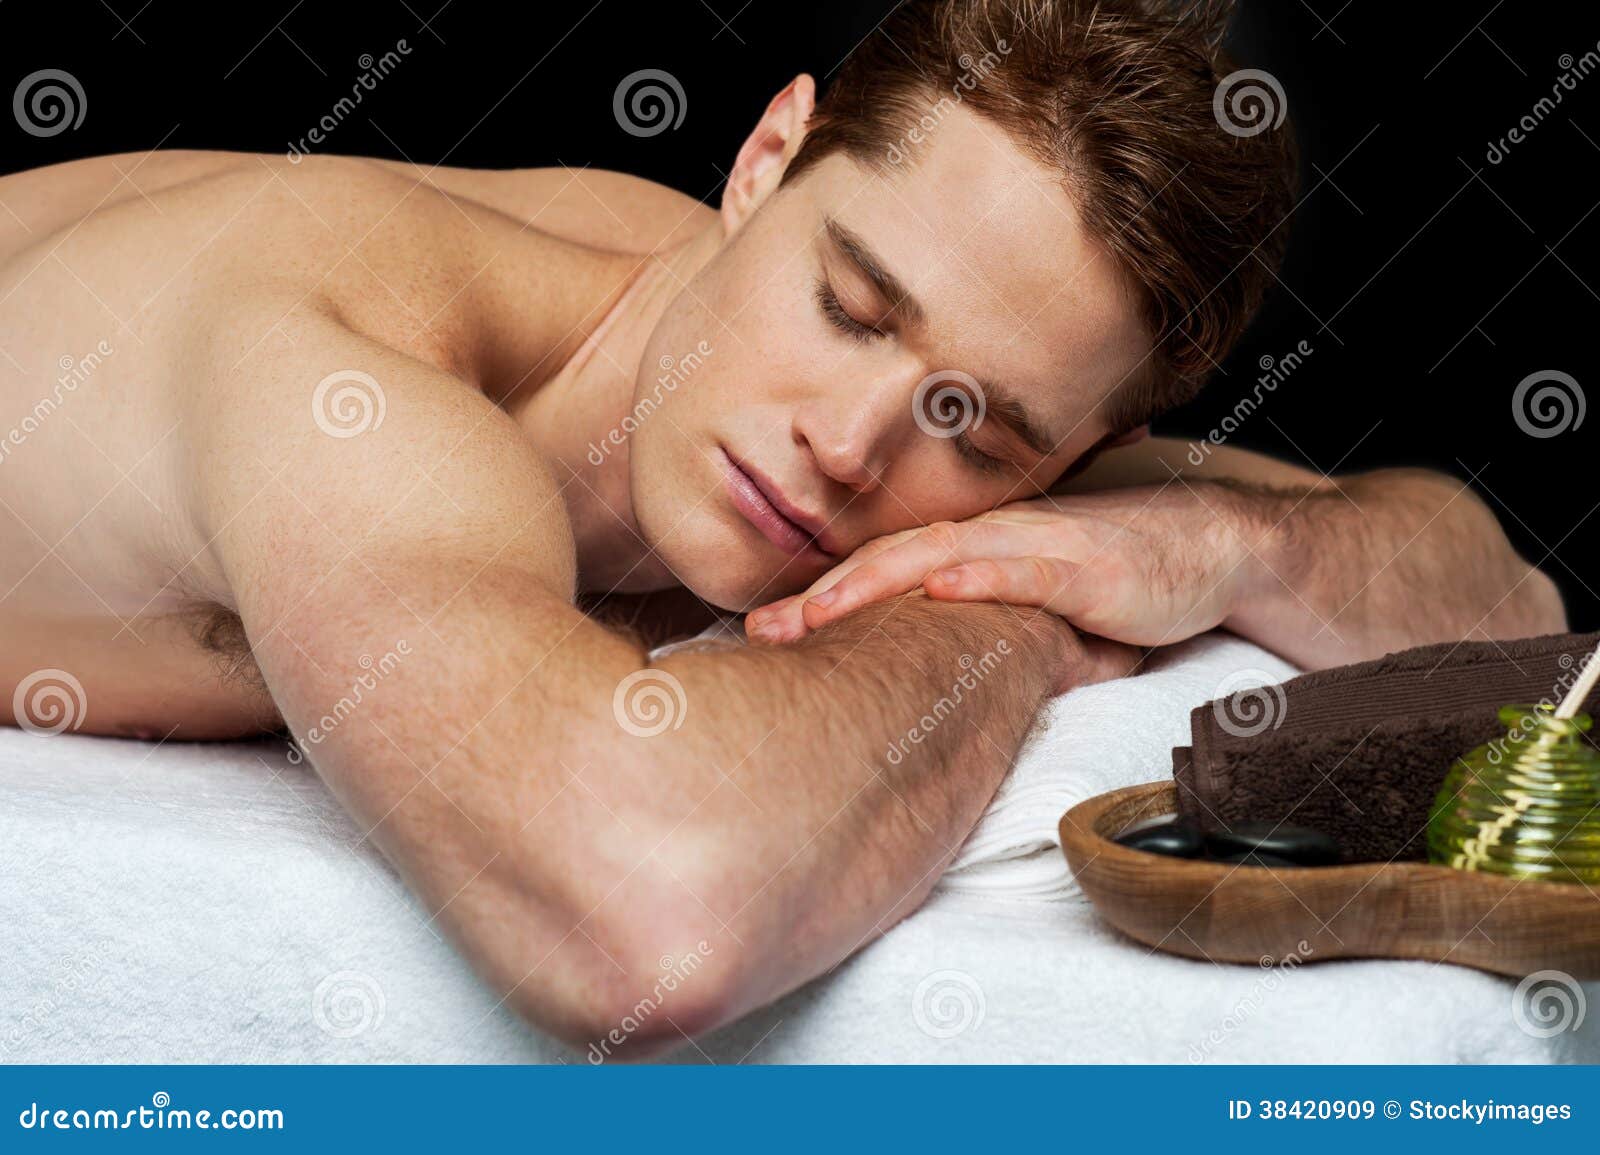 Handsome Man Relaxing At The Spa Royalty Free Stock Images